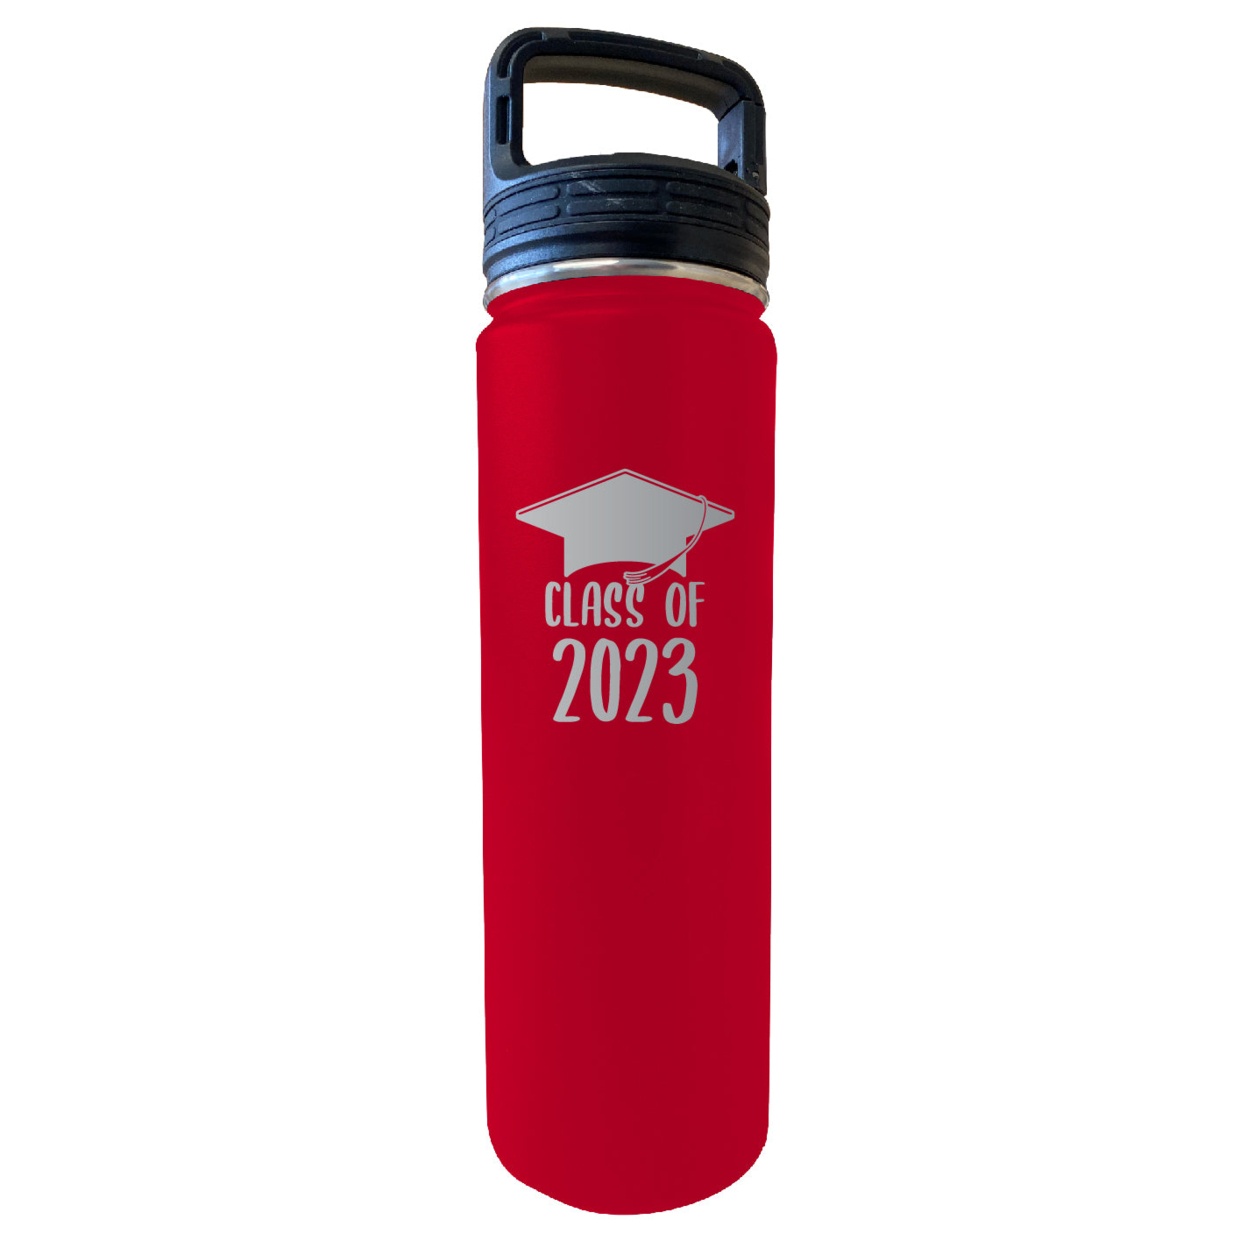 Class Of 2023 Graduation Senior 32 Oz Insulated Stainless Steel Tumbler - Navy